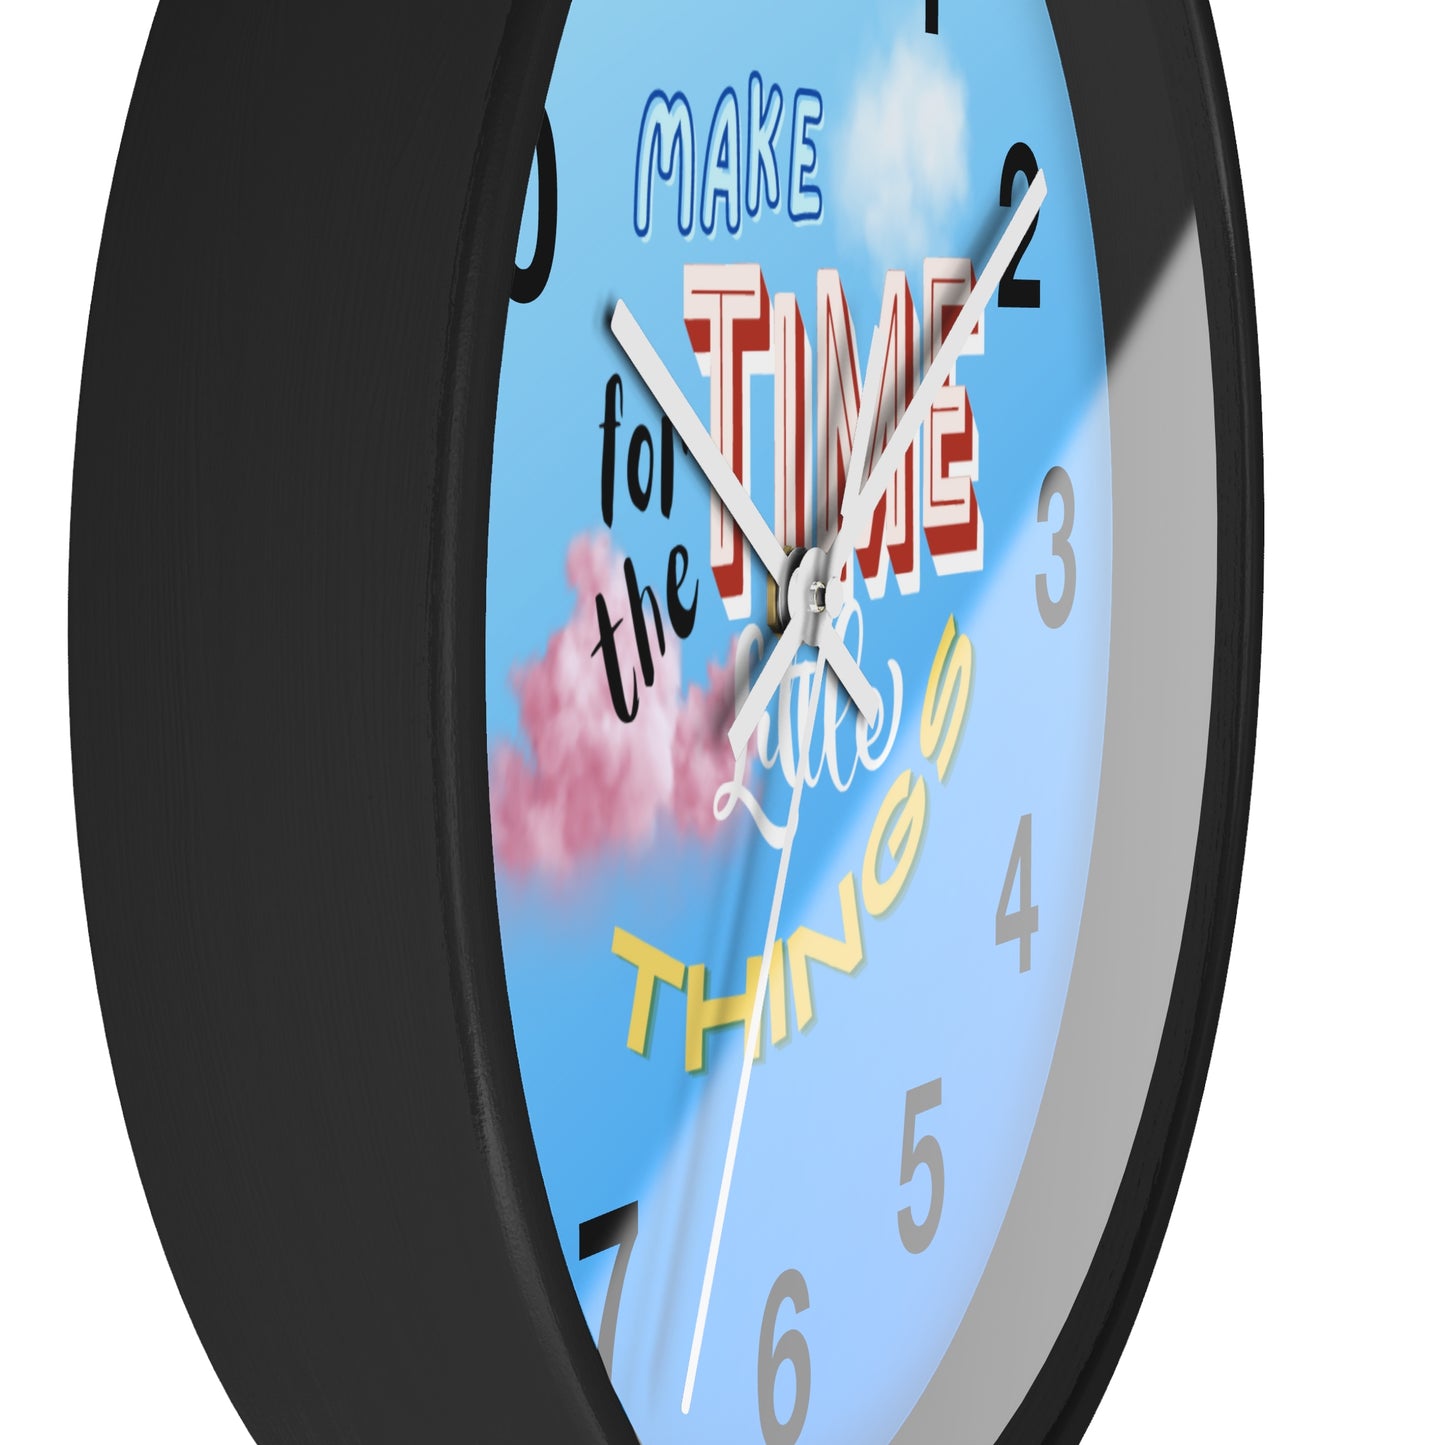 Colorful Playful Make Time for the Little Things Wall Clock Home Decor